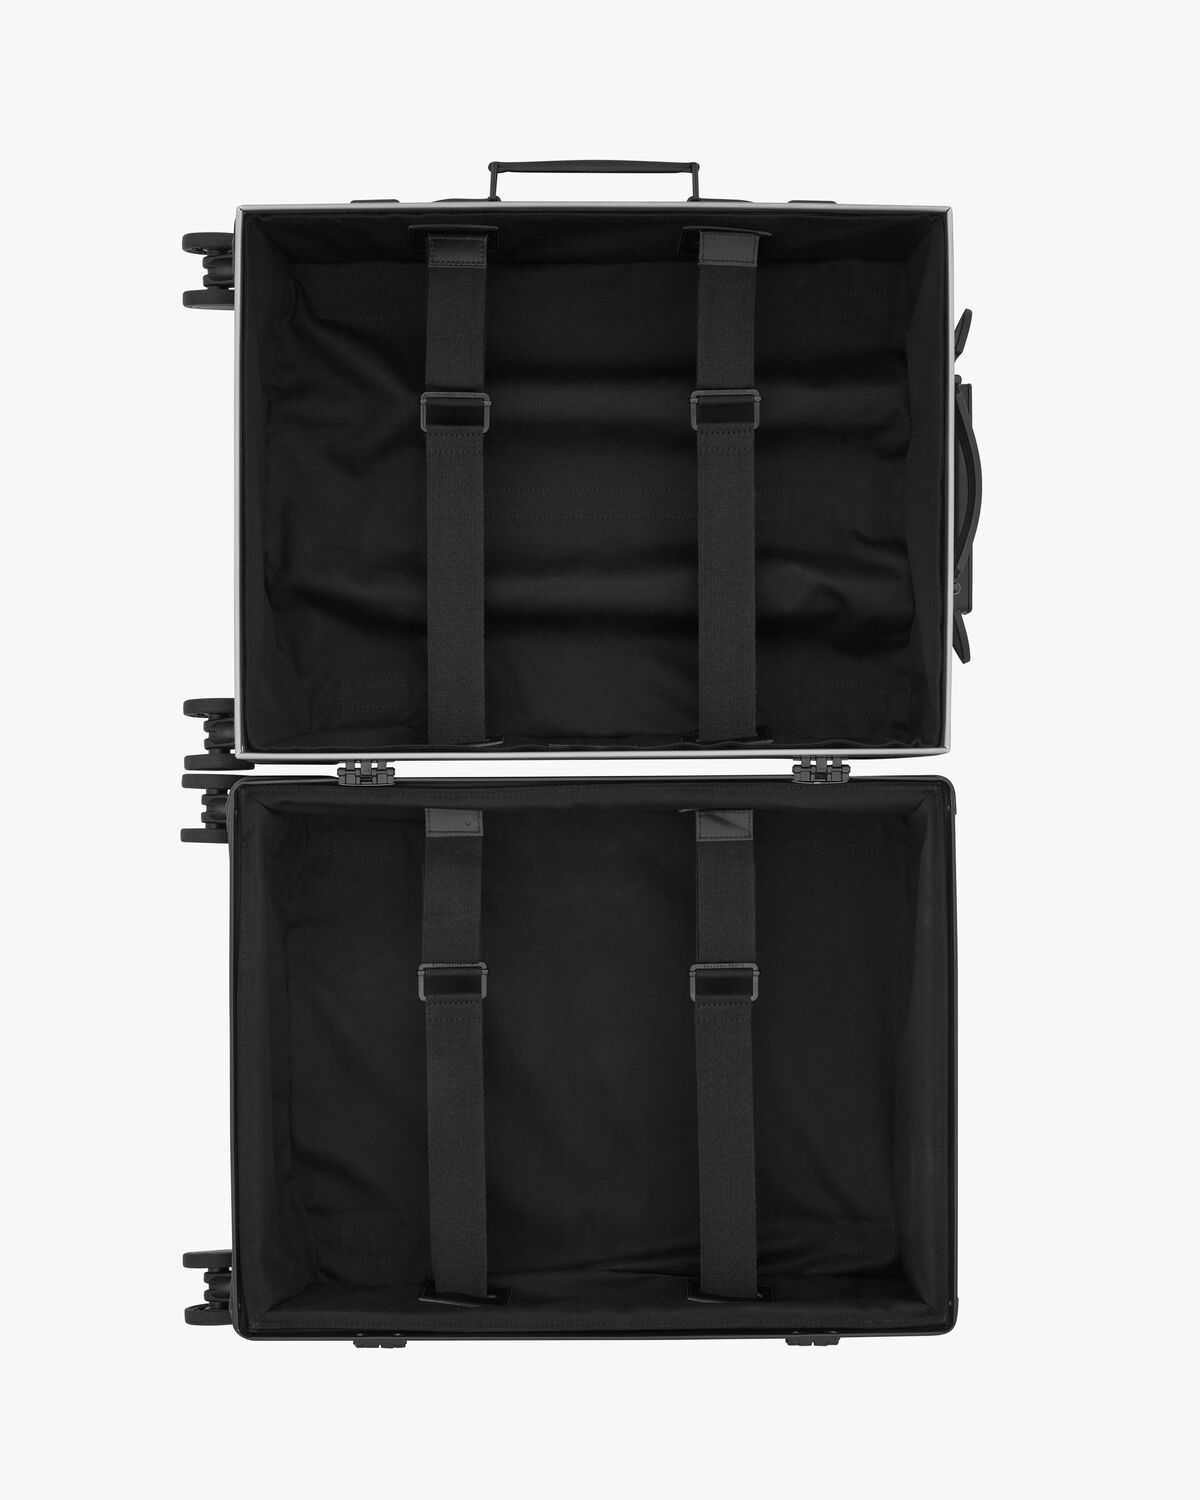 GLOBE-TROTTER SUITCASE IN LEATHER